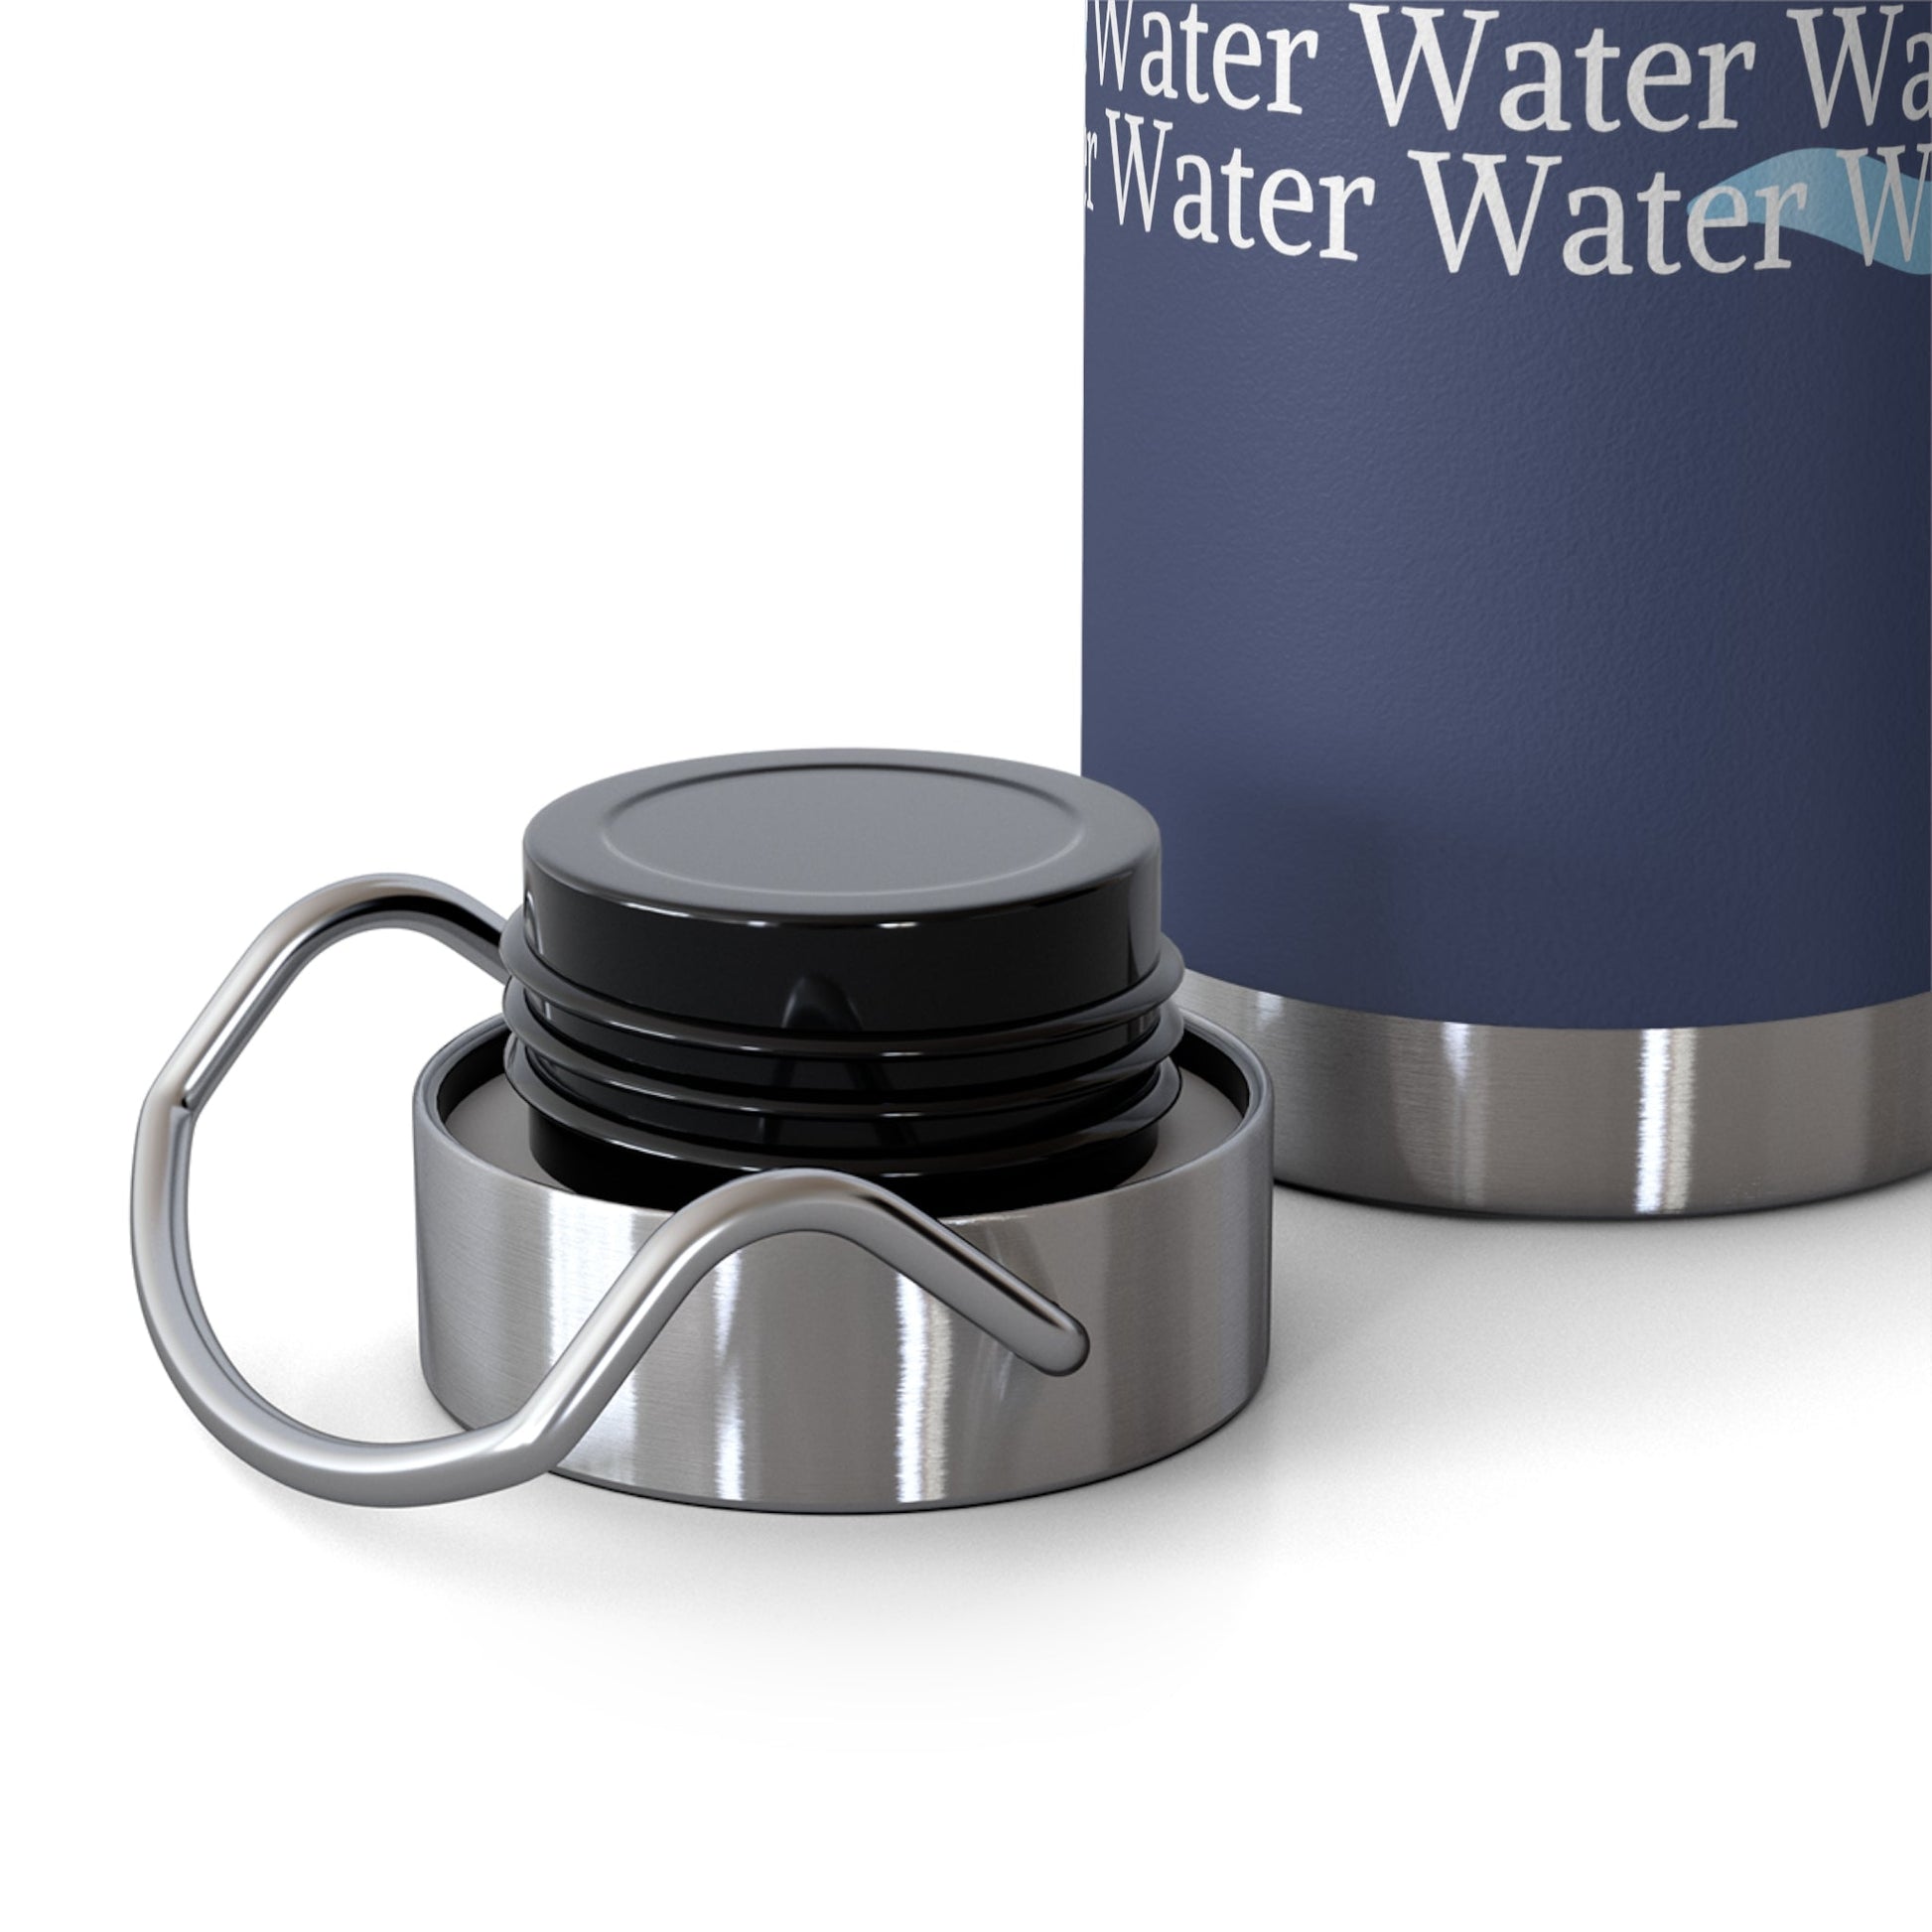 Water Water | 22oz Vacuum Insulated Bottle